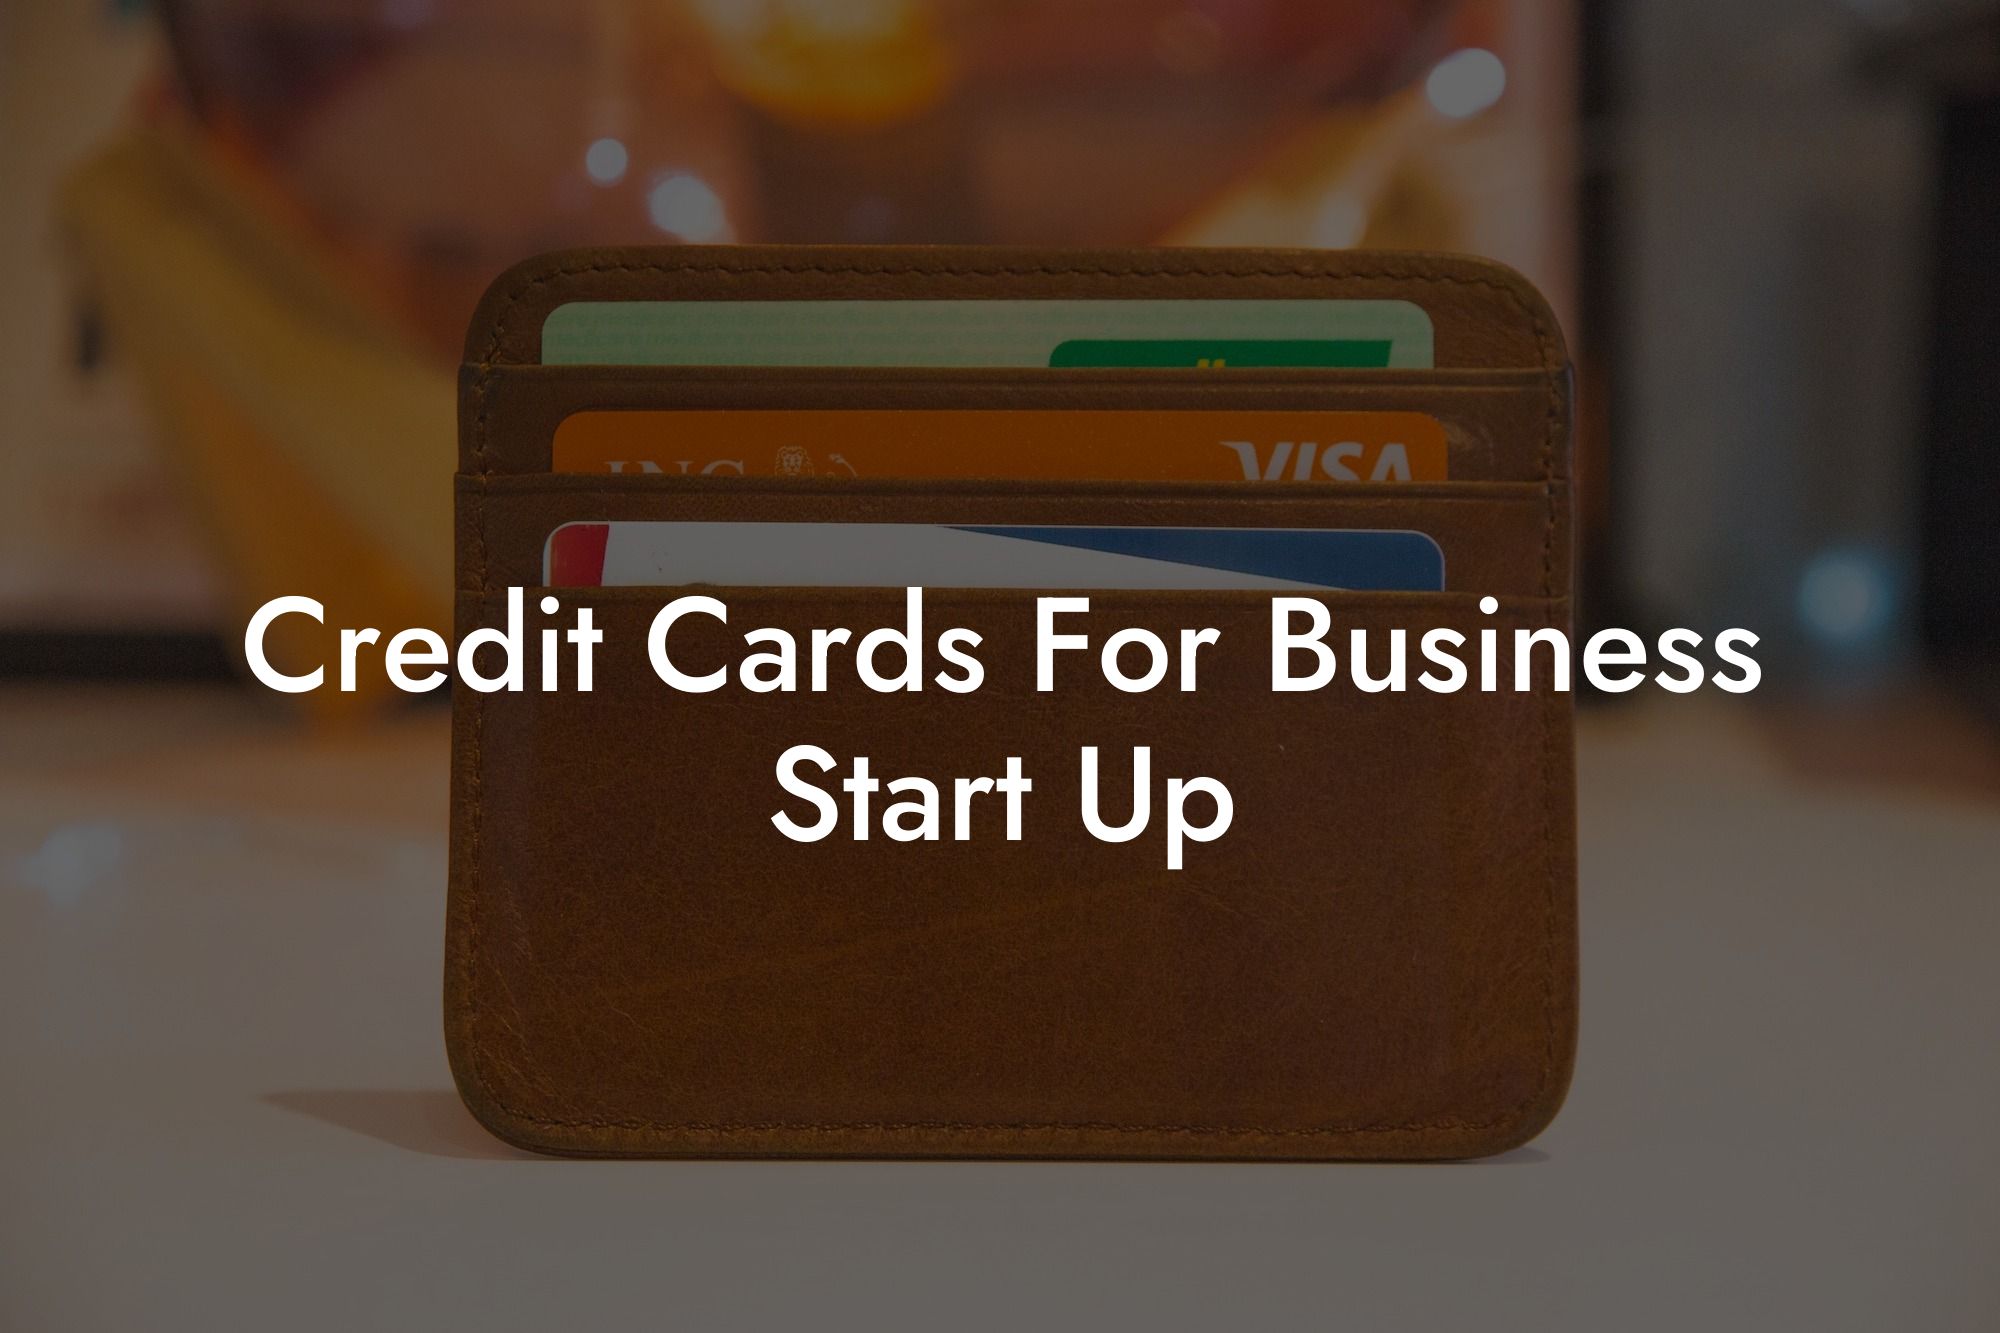 Credit Cards For Business Start Up